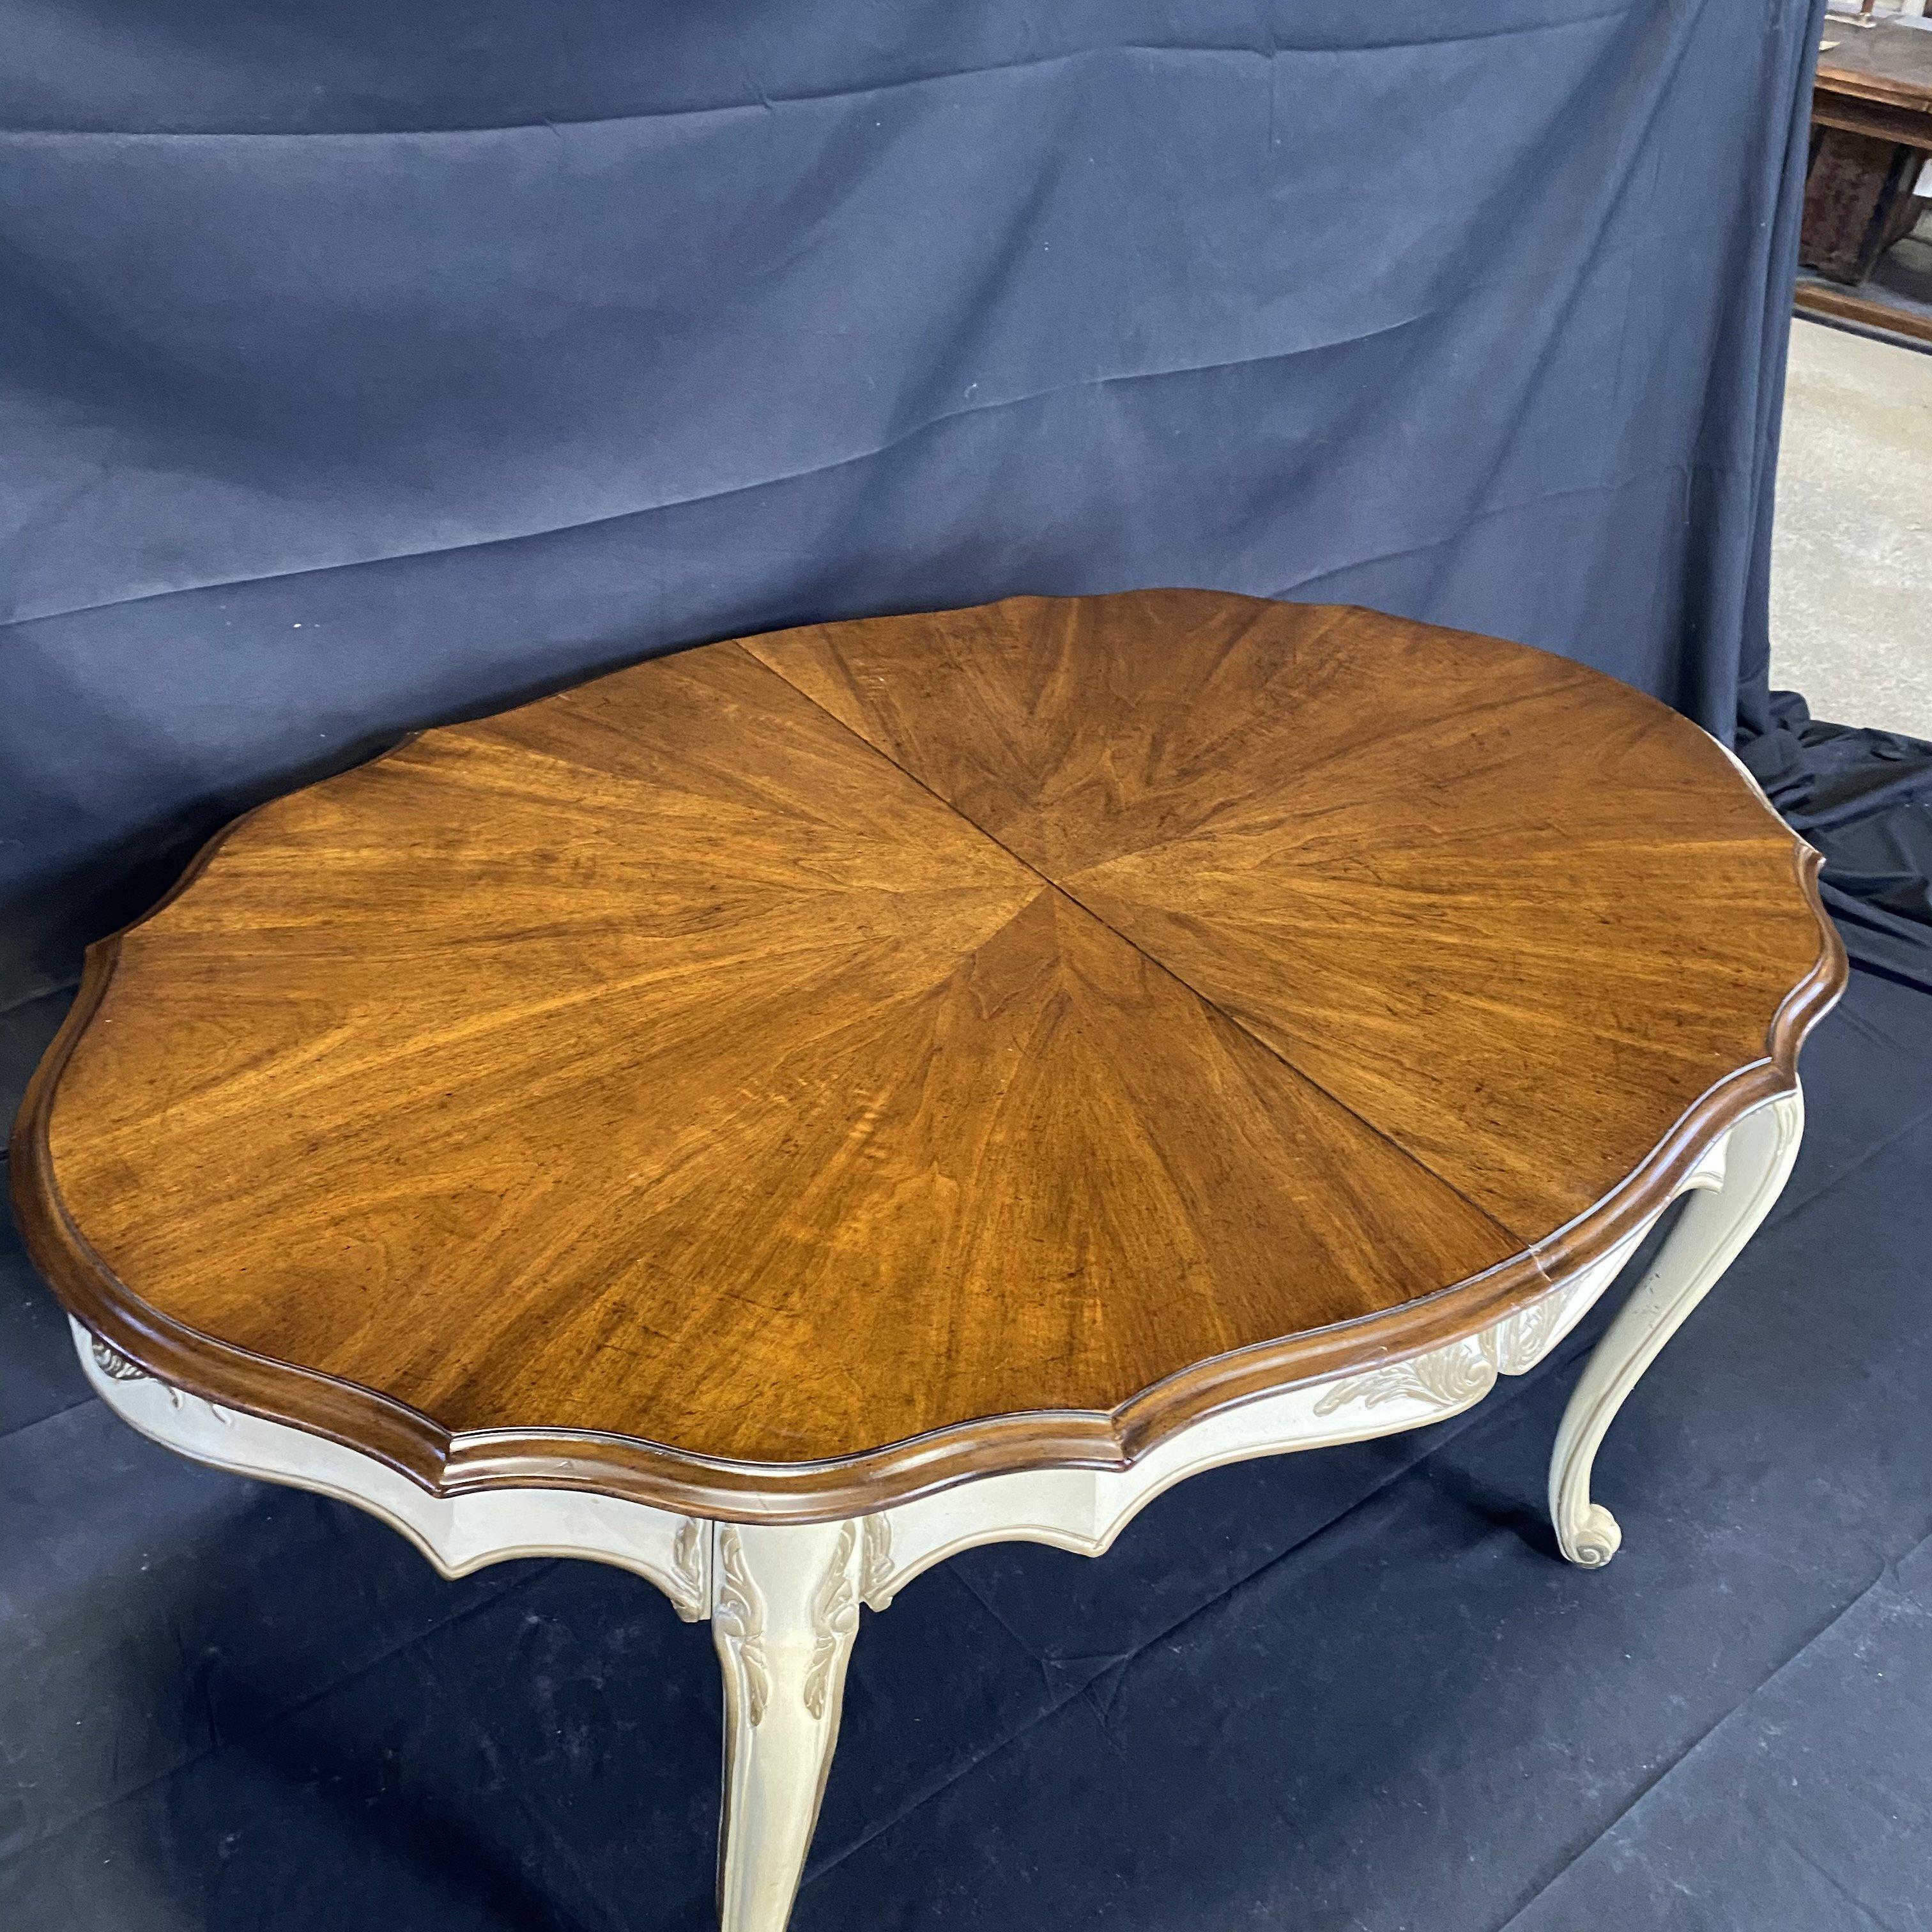 Beautiful mid century oval dining table with two leaves and an ivory painted scalloped apron with carved acanthus leaves and cabriole legs with spines ending at the top with splayed leaves. The apron and legs have banded borders. The table extends